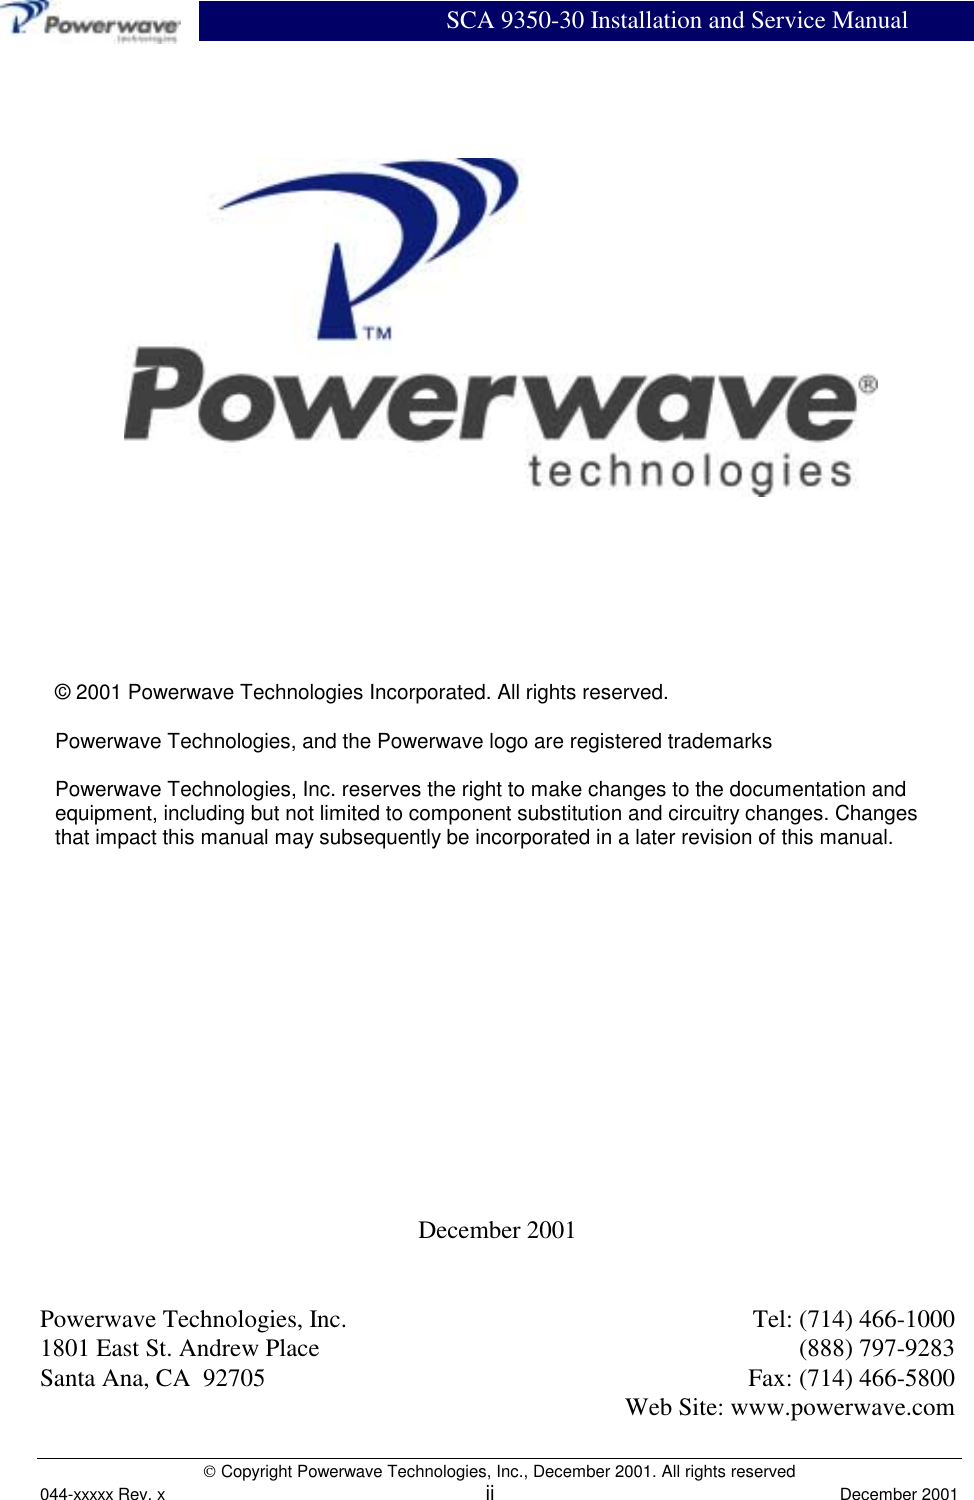 SCA 9350-30 Installation and Service Manual Copyright Powerwave Technologies, Inc., December 2001. All rights reserved044-xxxxx Rev. x ii December 2001December 2001Powerwave Technologies, Inc. Tel: (714) 466-10001801 East St. Andrew Place (888) 797-9283Santa Ana, CA  92705 Fax: (714) 466-5800Web Site: www.powerwave.com© 2001 Powerwave Technologies Incorporated. All rights reserved.Powerwave Technologies, and the Powerwave logo are registered trademarksPowerwave Technologies, Inc. reserves the right to make changes to the documentation andequipment, including but not limited to component substitution and circuitry changes. Changesthat impact this manual may subsequently be incorporated in a later revision of this manual.